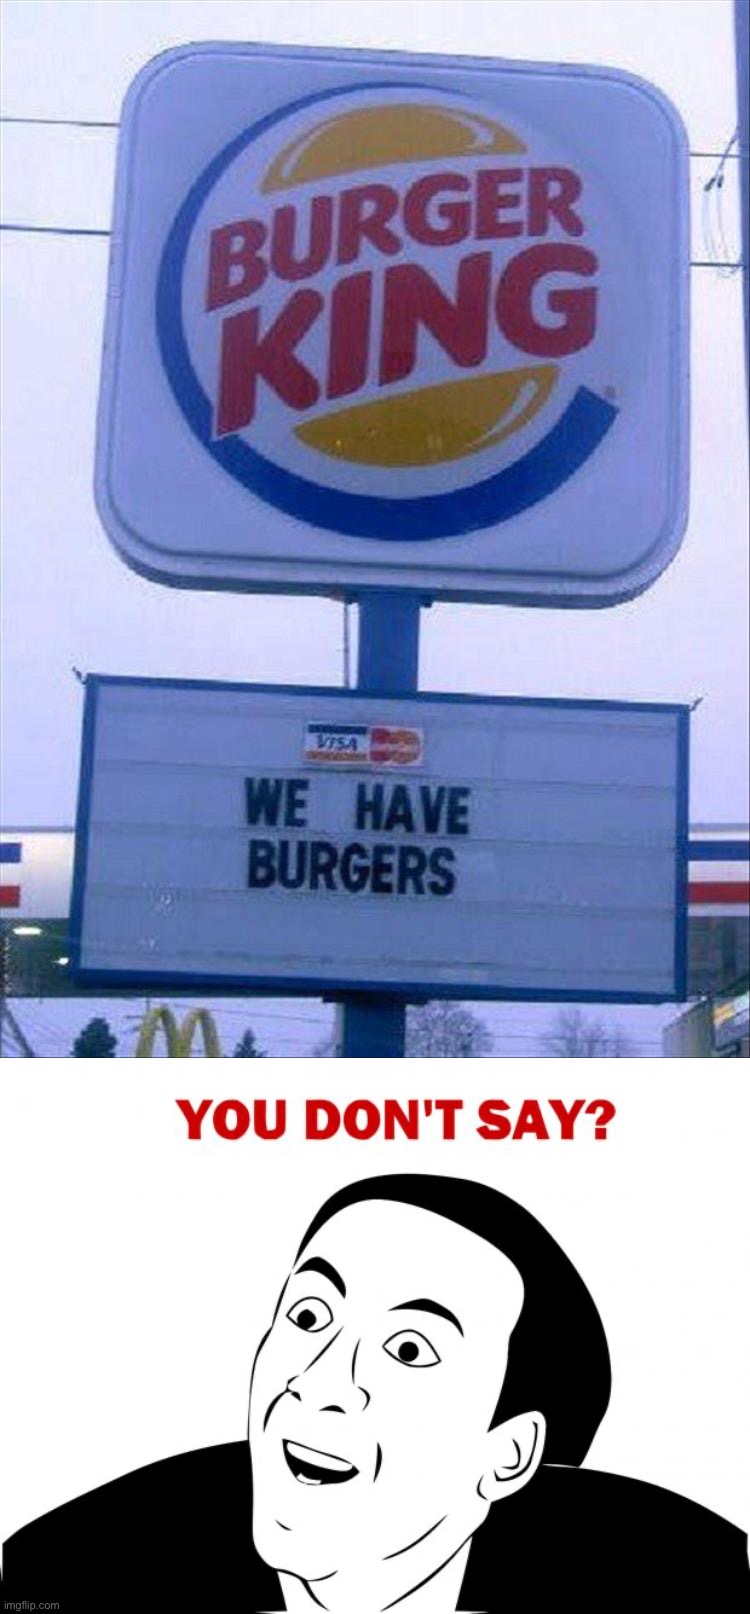 Imagine Burger King having burgers @-@ | image tagged in memes,you don't say,funny,oh wow,stupid,funny signs | made w/ Imgflip meme maker